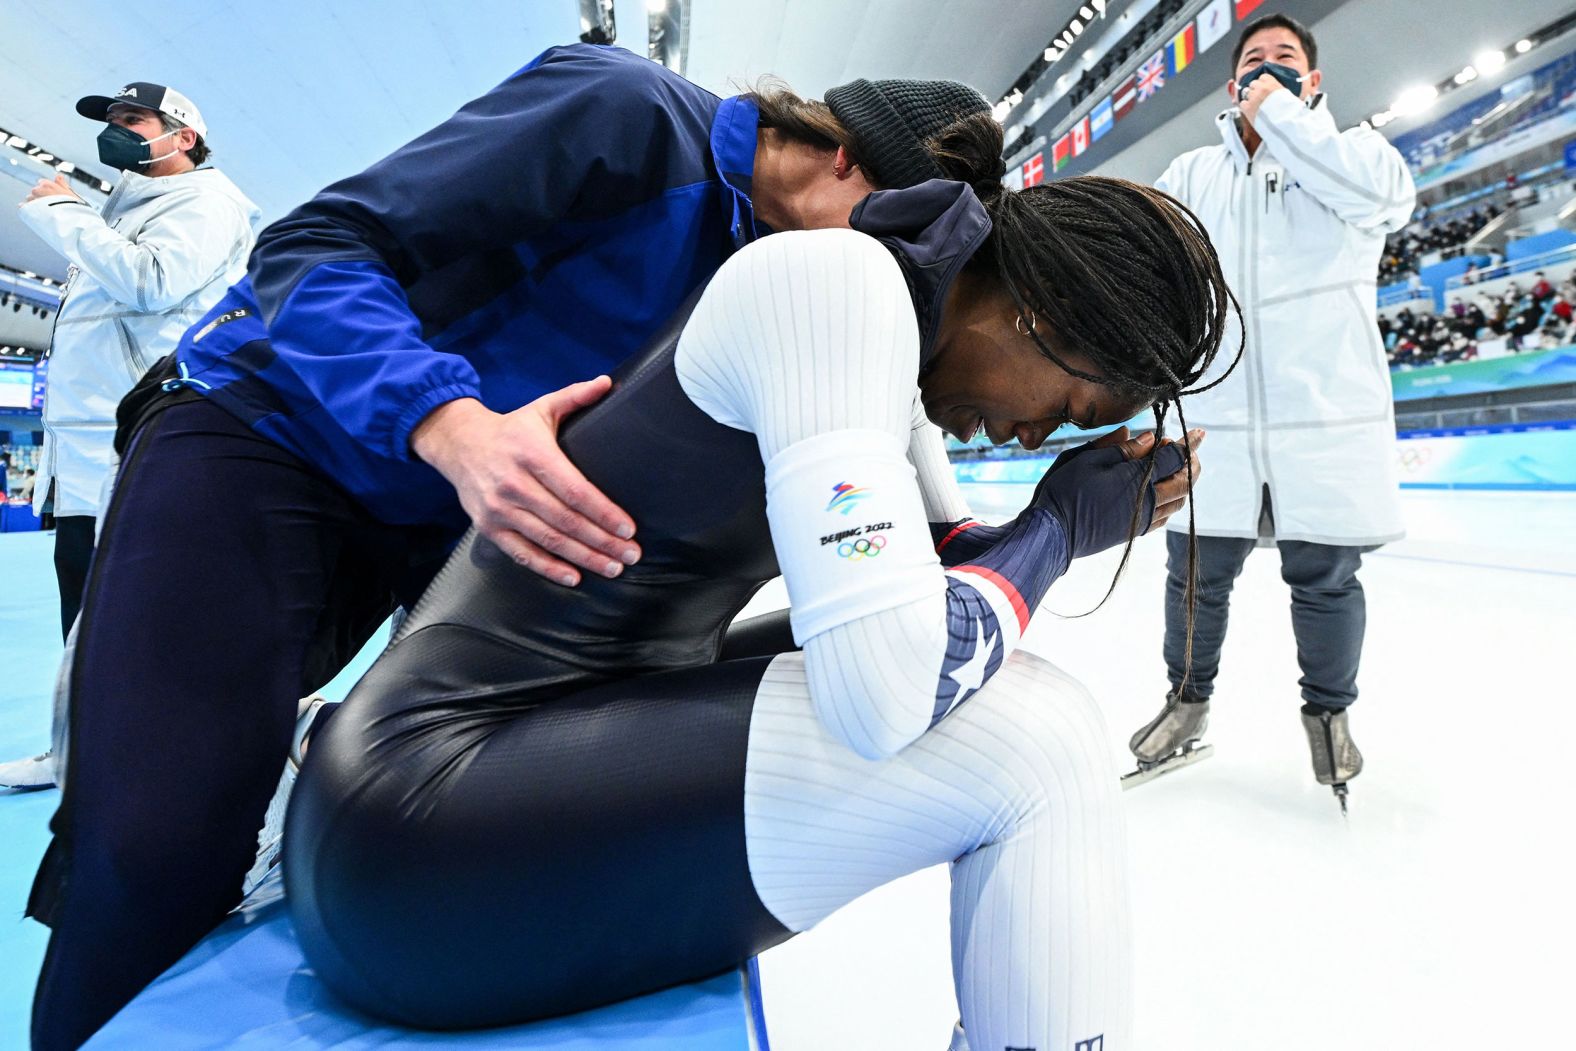 American speedskater Erin Jackson celebrates after <a href="index.php?page=&url=https%3A%2F%2Fwww.cnn.com%2F2022%2F02%2F13%2Fsport%2Ferin-jackson-500m-speed-skating-winter-olympics-gold-medal-spt-intl%2Findex.html" target="_blank">winning the 500 meters</a> on February 13. She's the first Black woman to win an individual medal in speedskating at the Olympics, according to Team USA. She's also the first US woman to win a speedskating gold at the Olympics since Bonnie Blair did so in 1994.